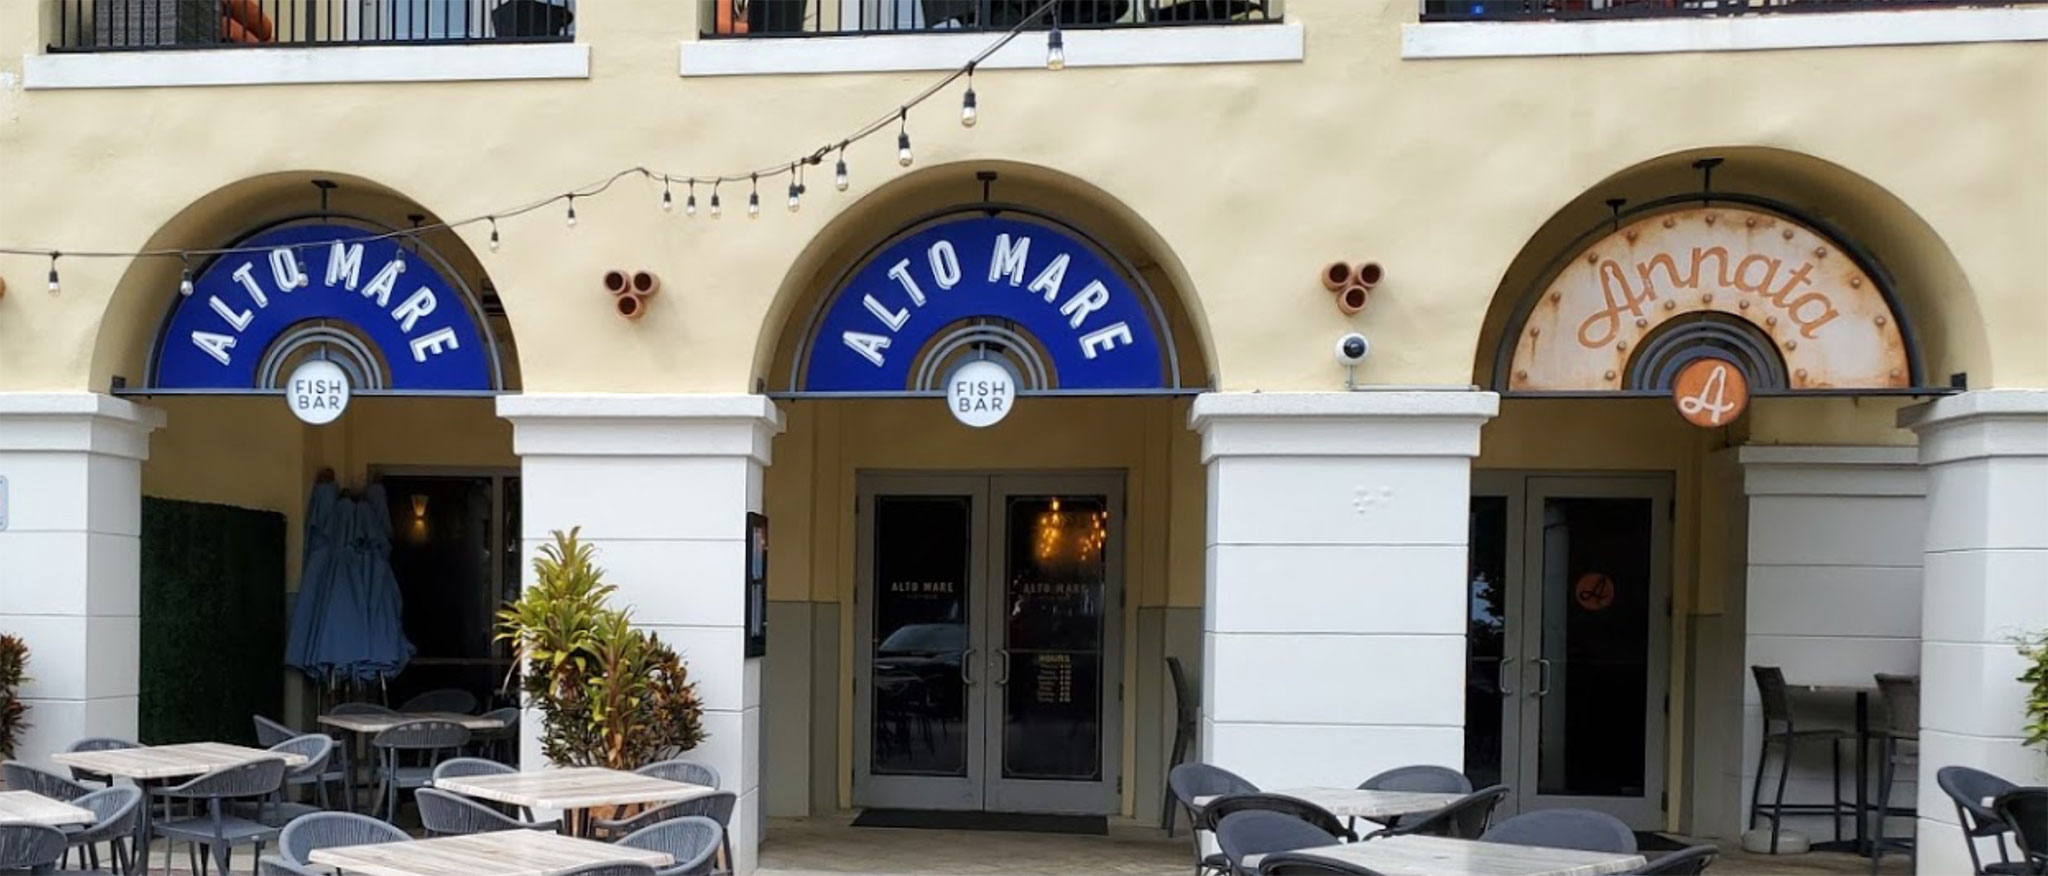 Annata Restaurant & Wine Bar and Alto Mare Fish Bar Get New Owners